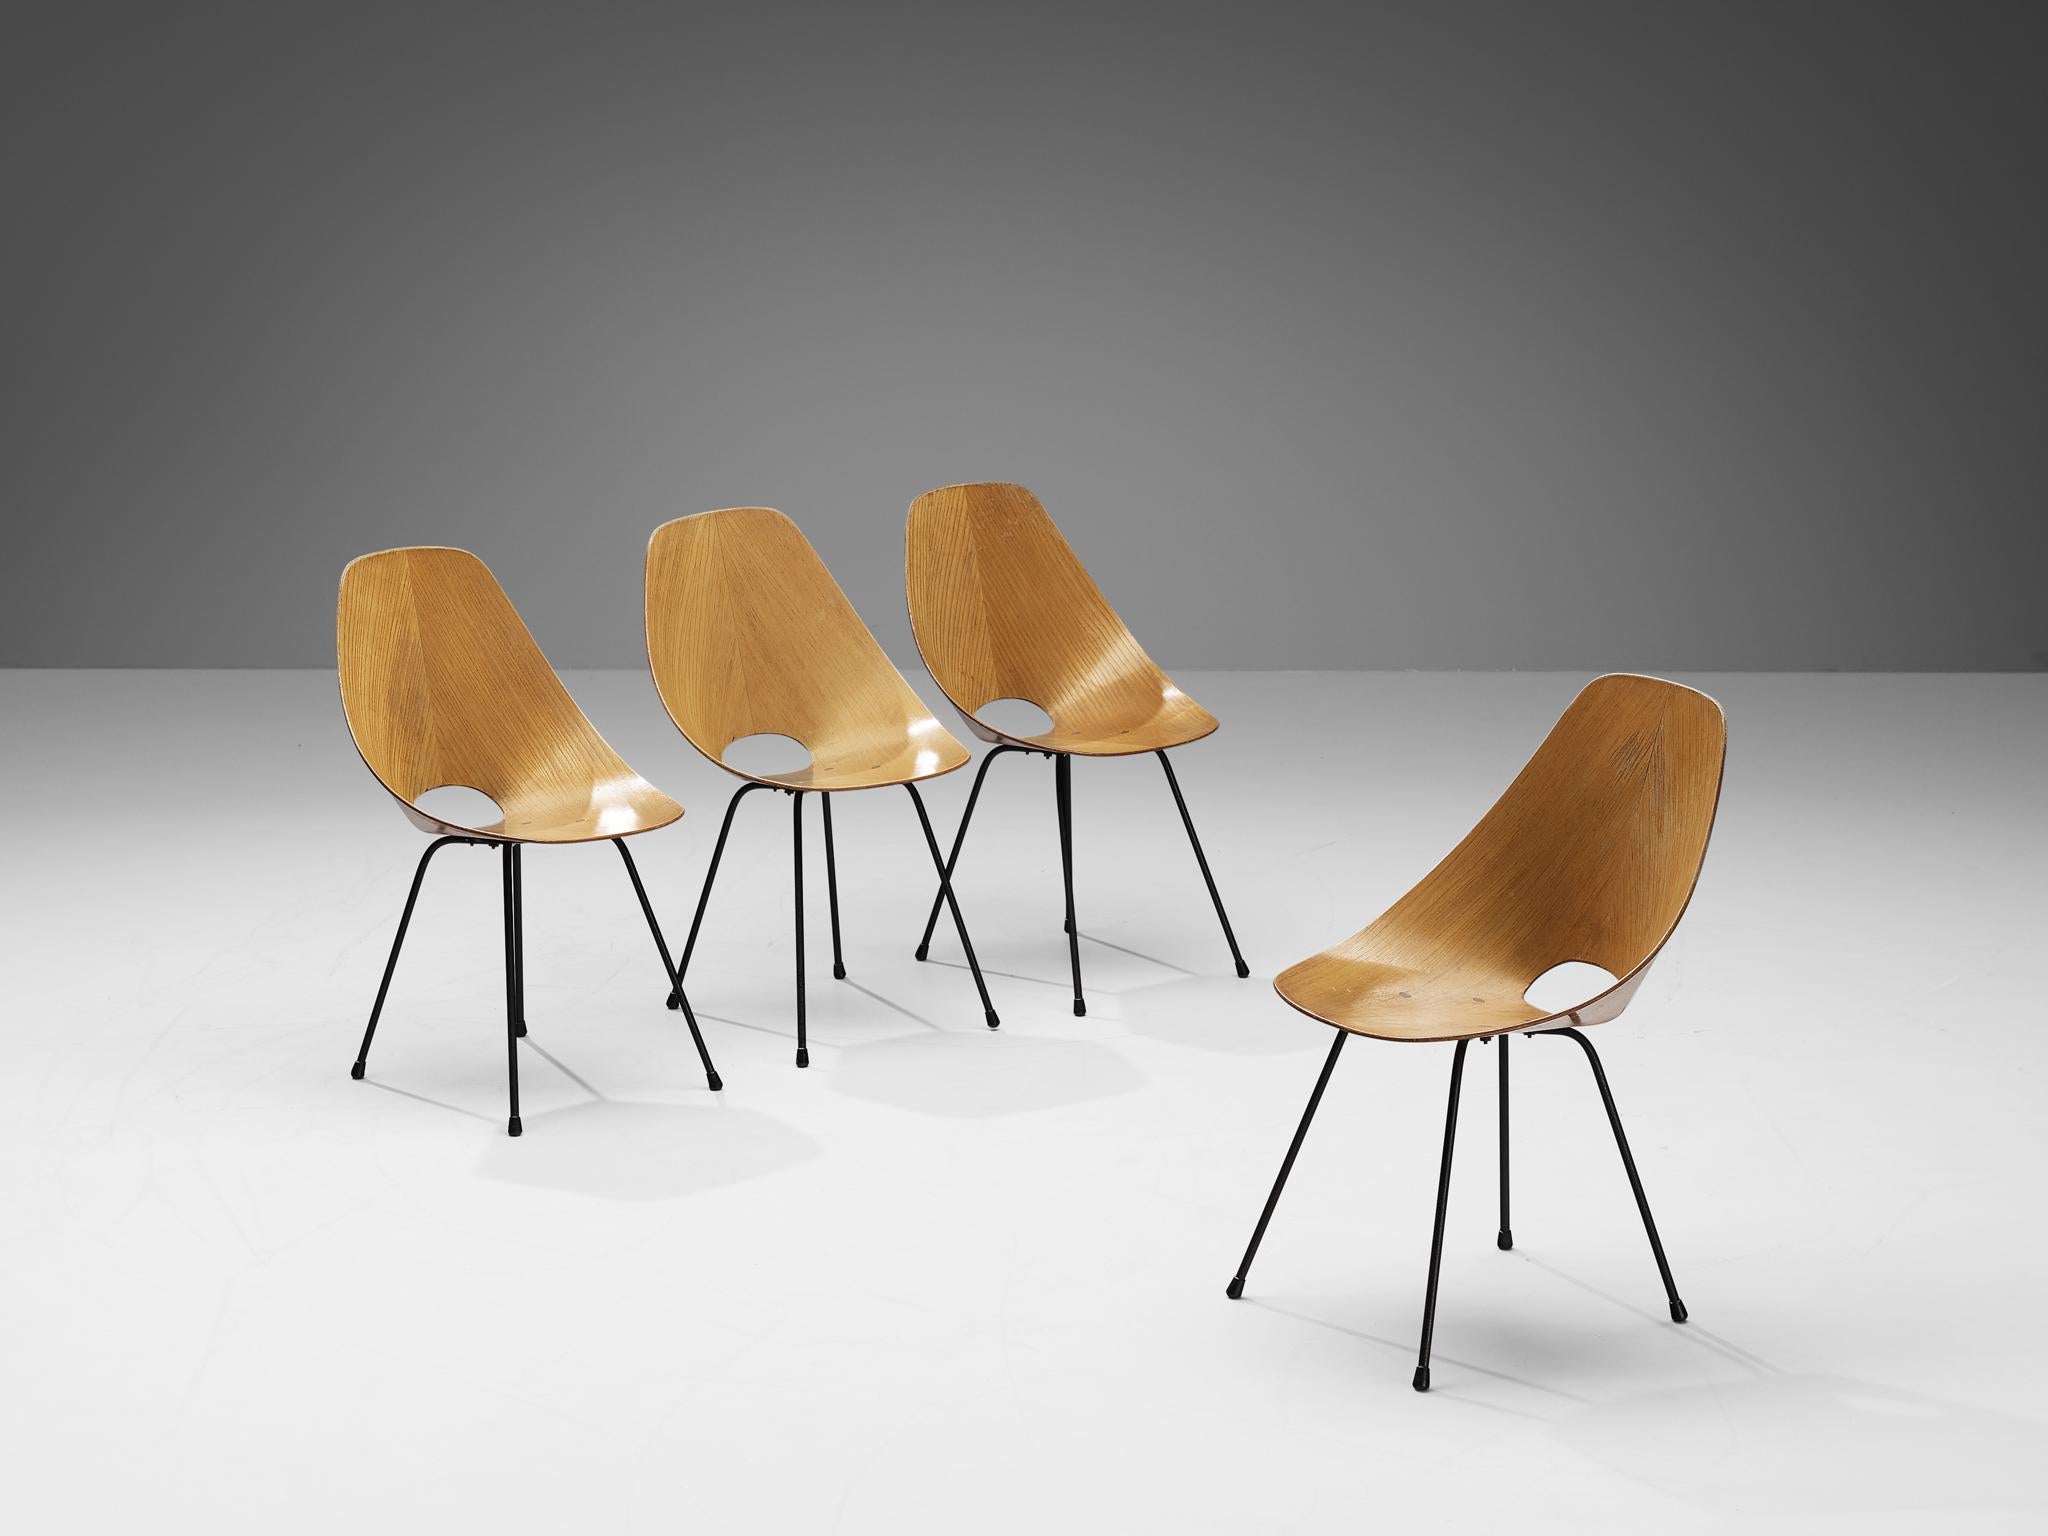 Vittorio Nobili for Tagliabue, set of four dining chairs model 'Medea', ash, metal, brass, Italy, 1955.

This 'Medea' chair is designed by the Italian designer Vittorio Nobili. The plywood chairs are veneered in carefully chosen ash, which gives